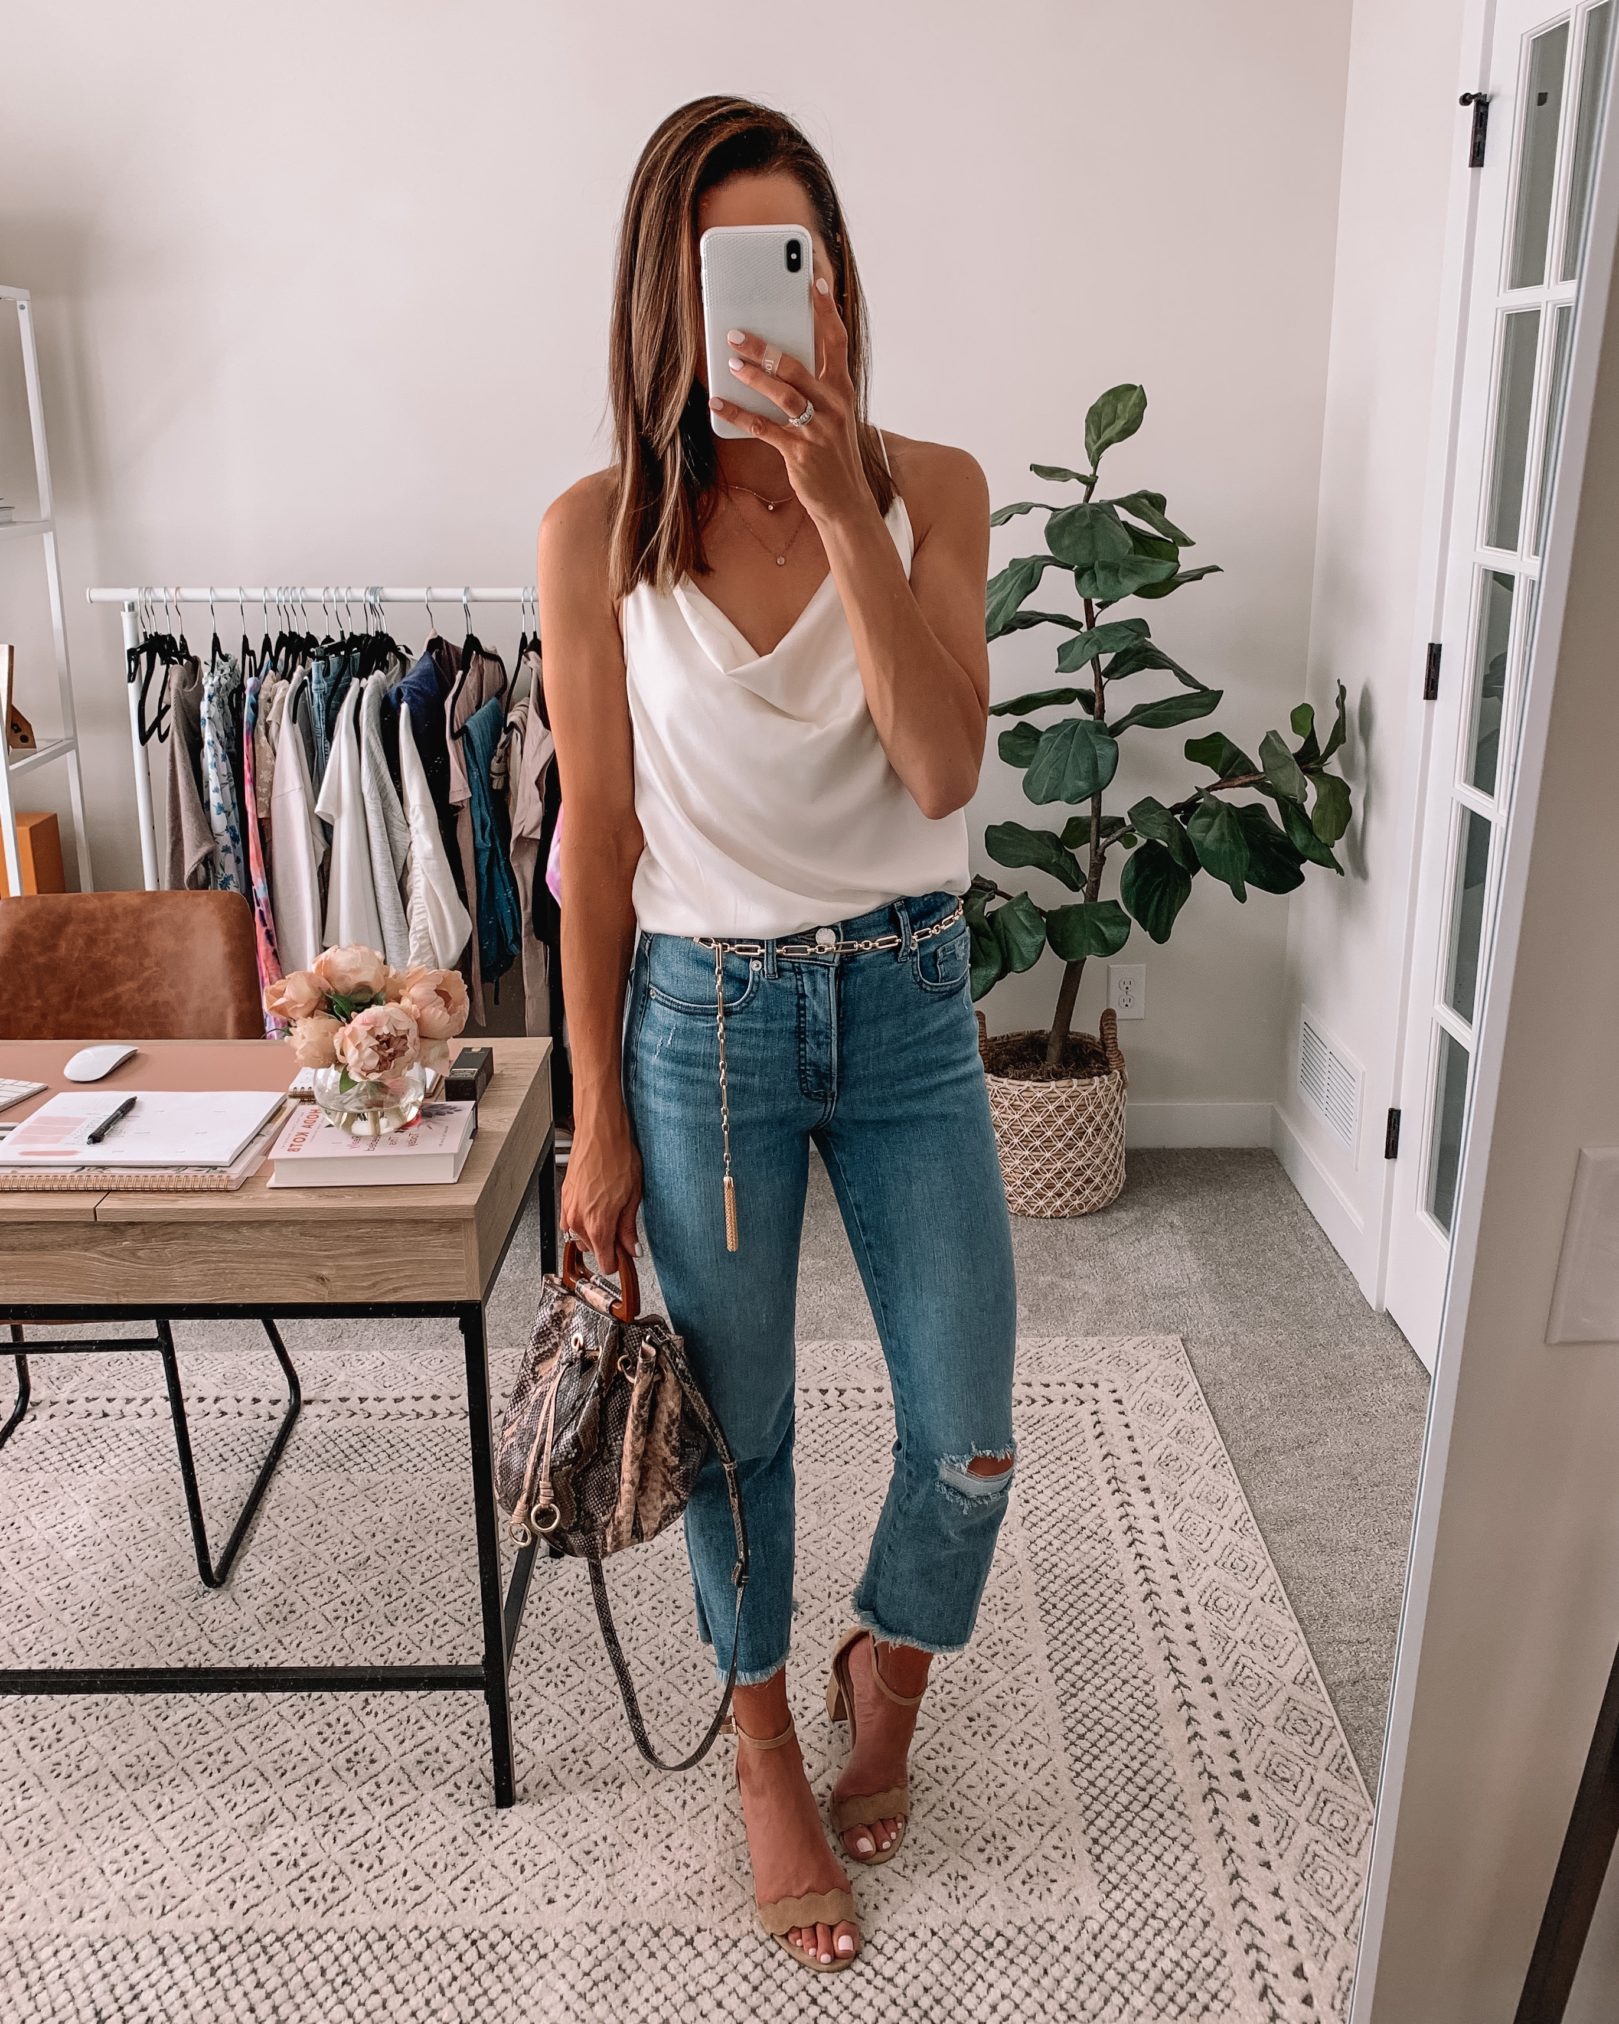 Night Out & Going Out Outfits, Date Night Outfits